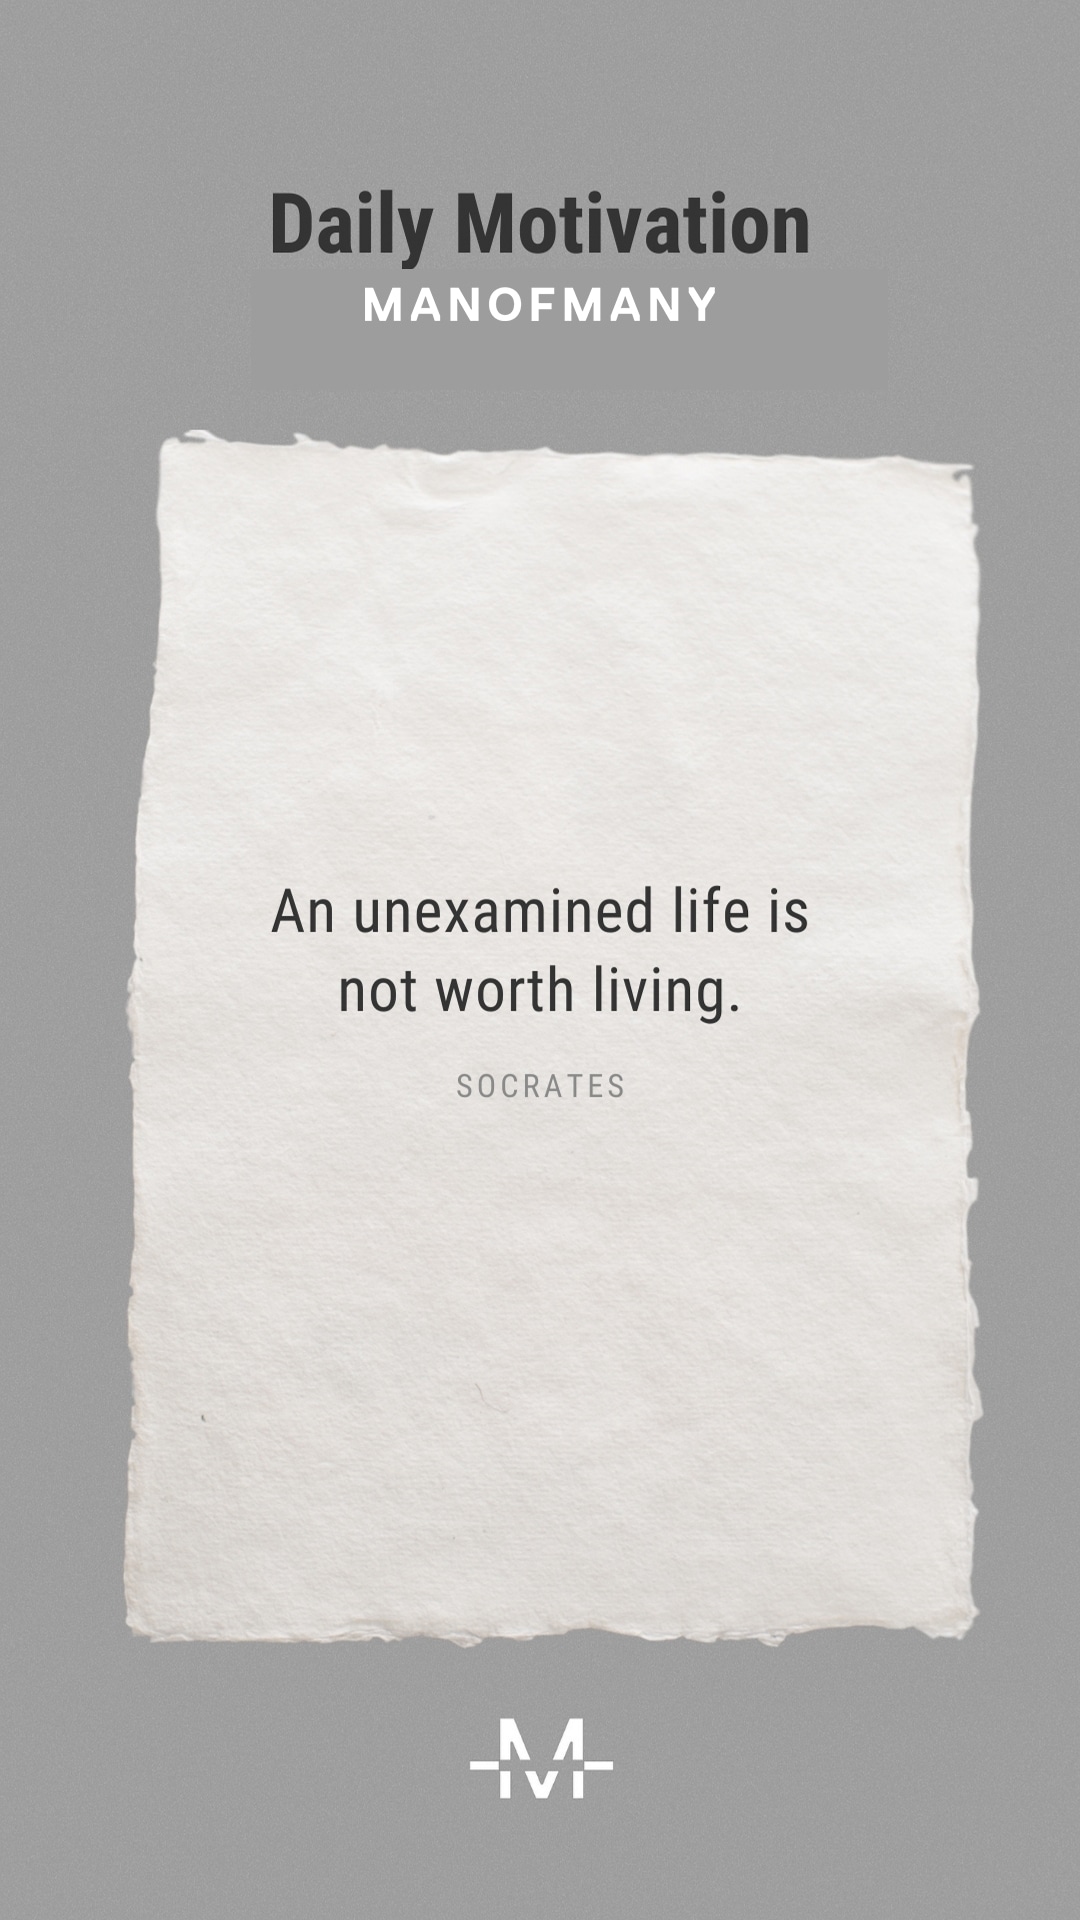 An unexamined life is not worth living. –Socrates quote